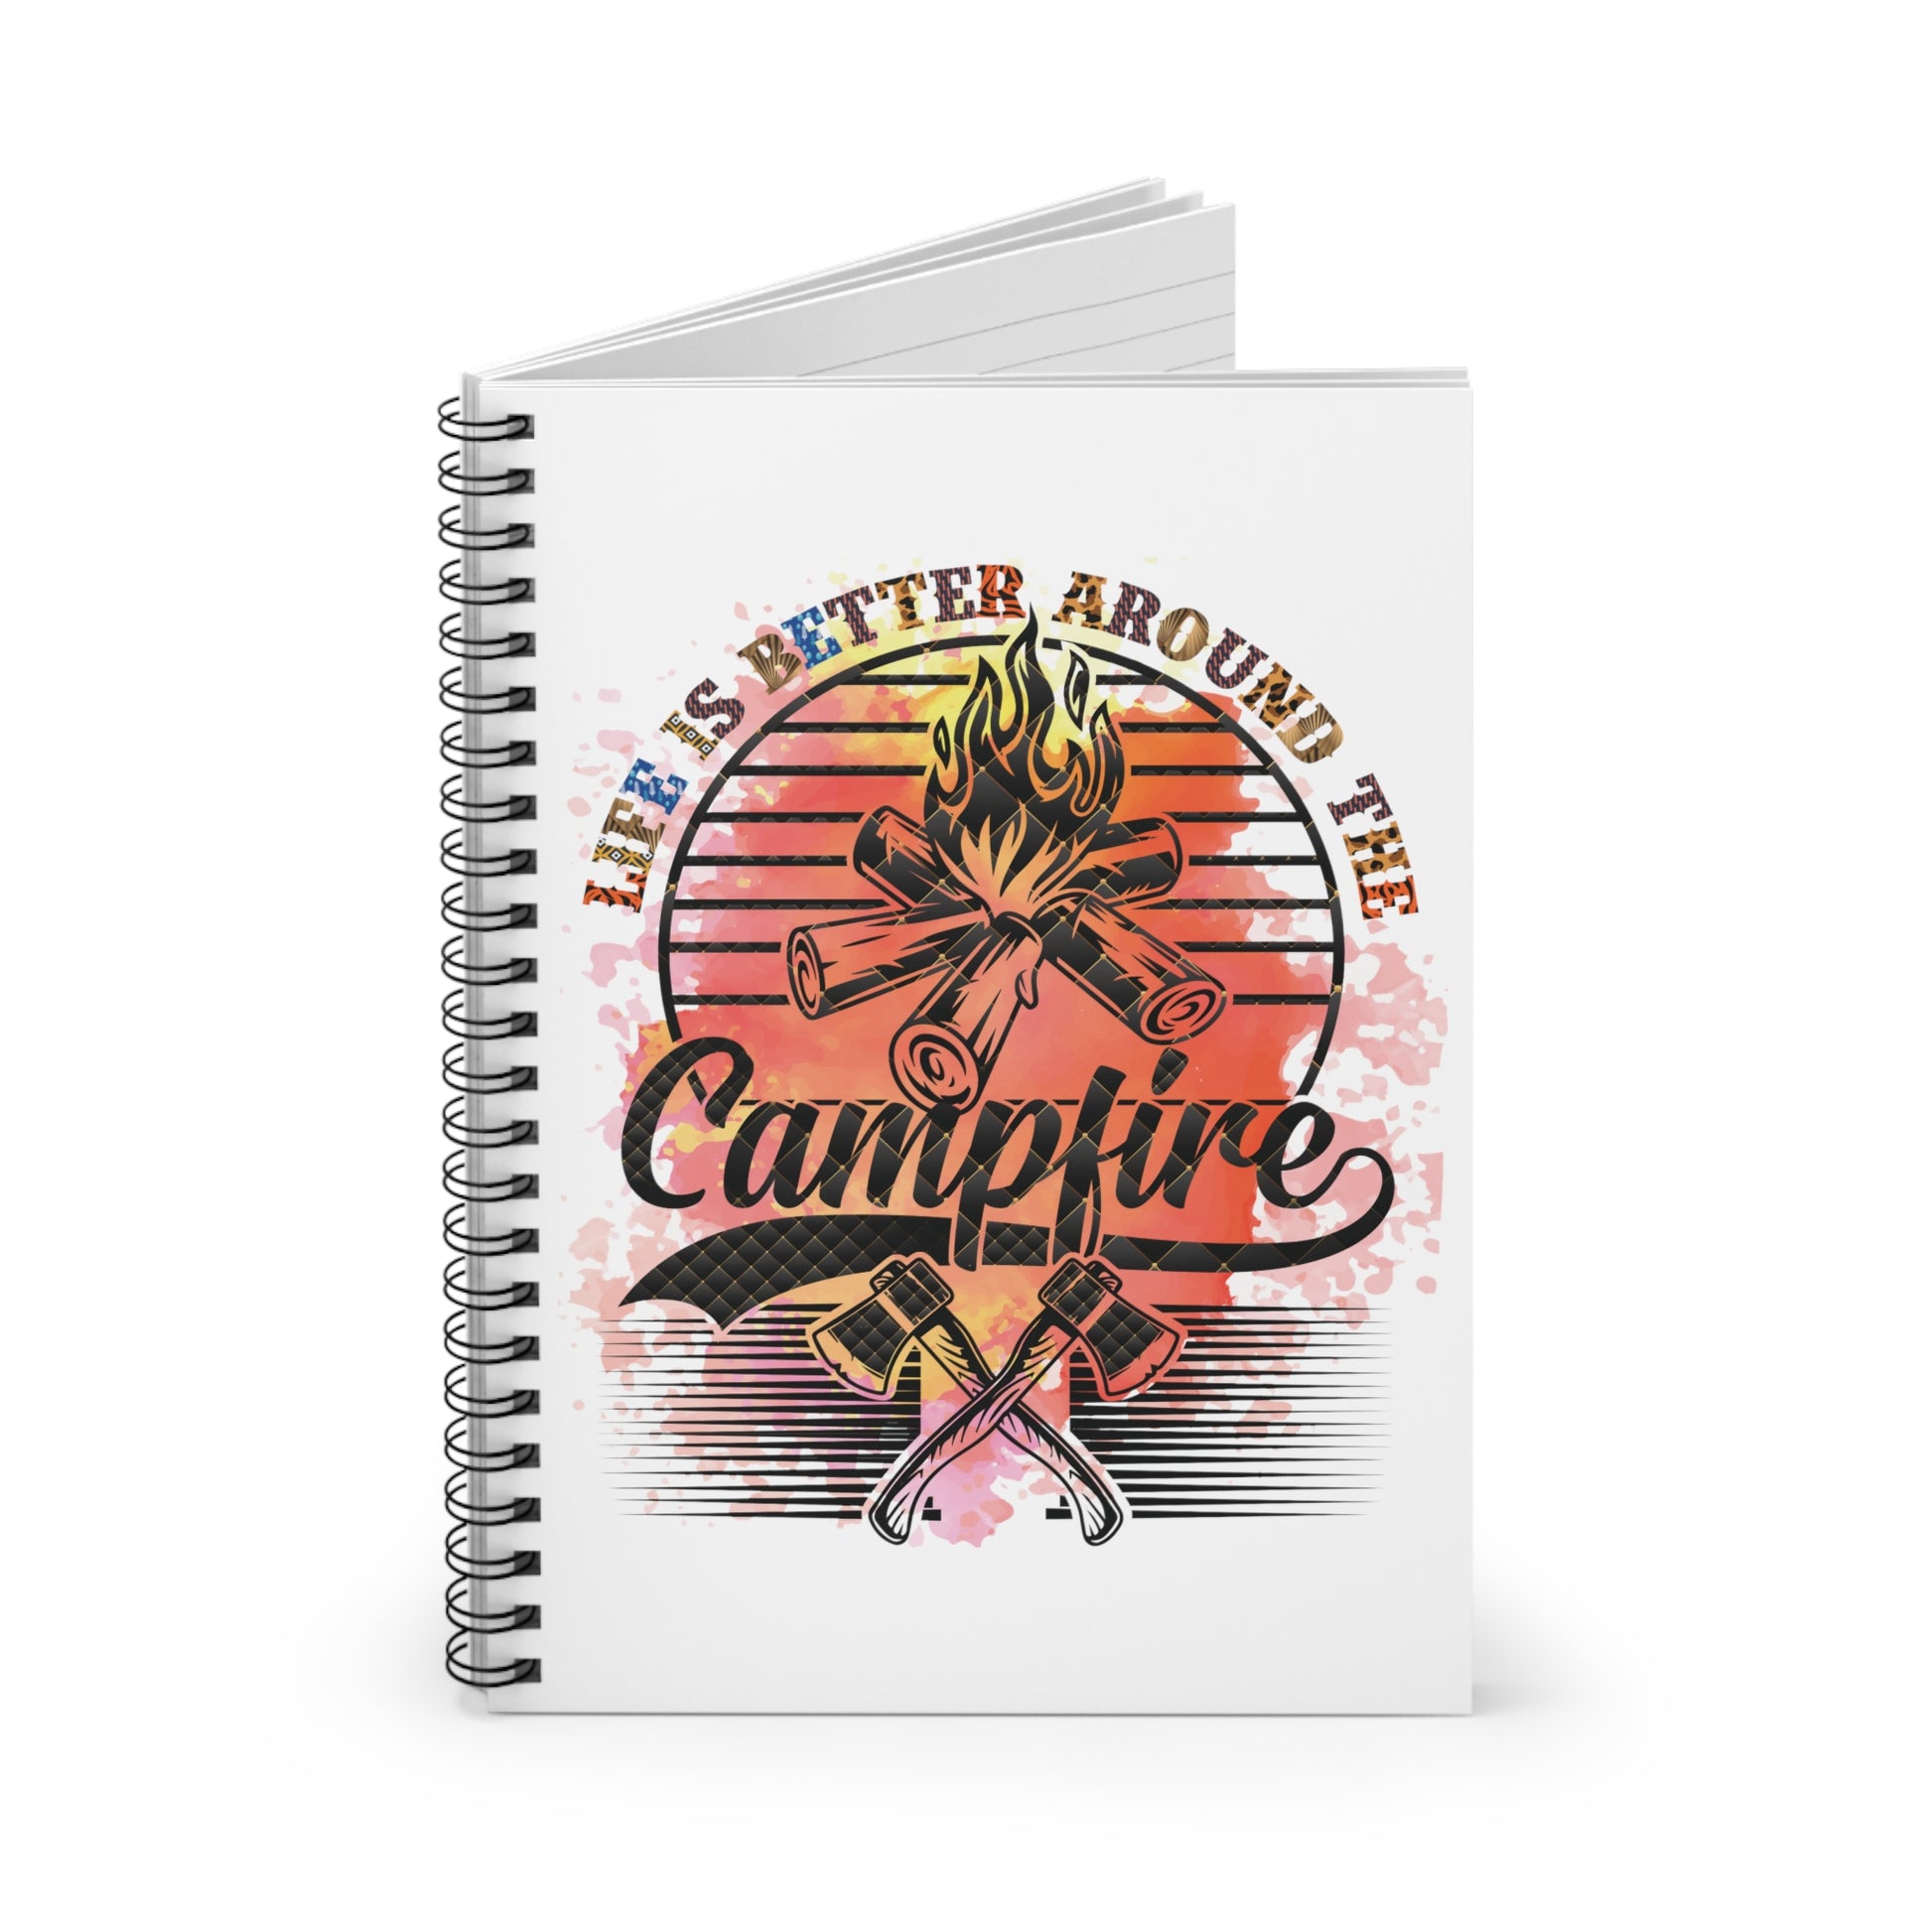 Life is Better Around the Campfire: Spiral Notebook - Log Books - Journals - Diaries - and More Custom Printed by TheGlassyLass